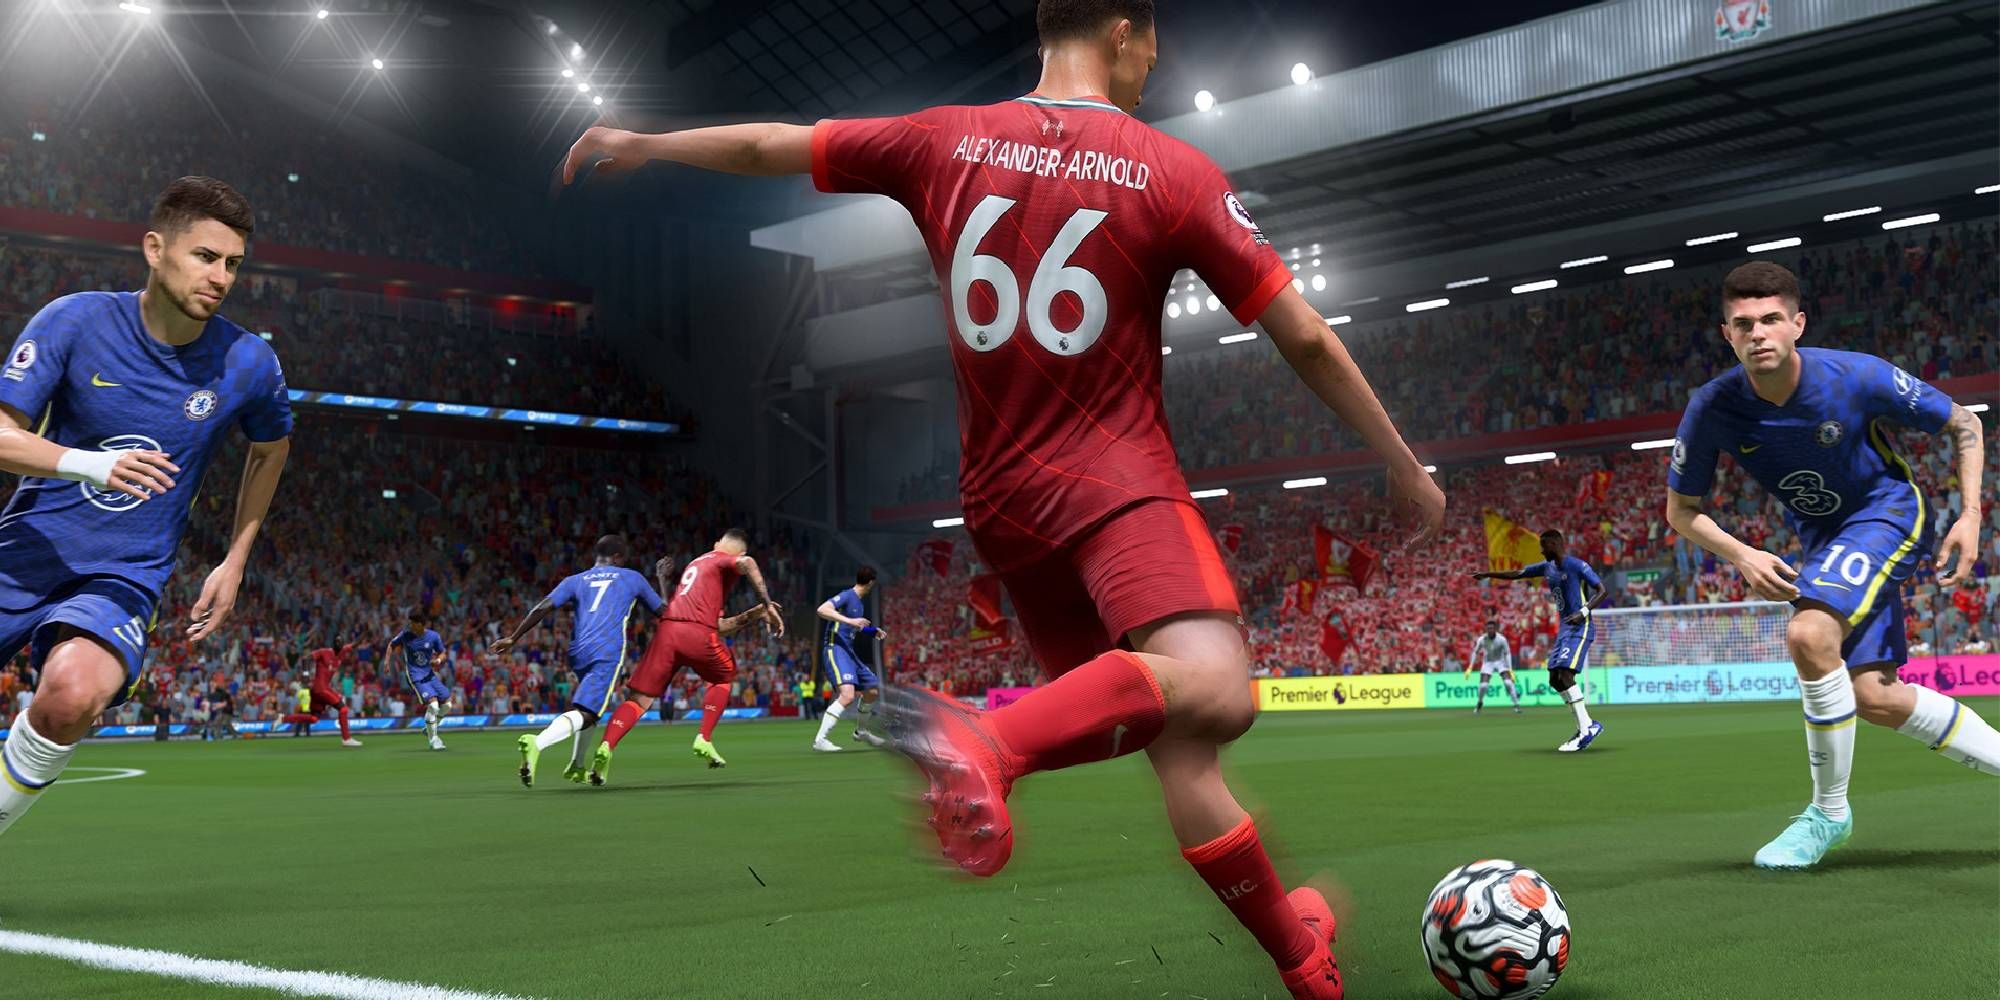 FIFA 23 Player Number 66 Taking Shot Against Two Athletes in Blue Uniforms from Near the Corner of the Pitch